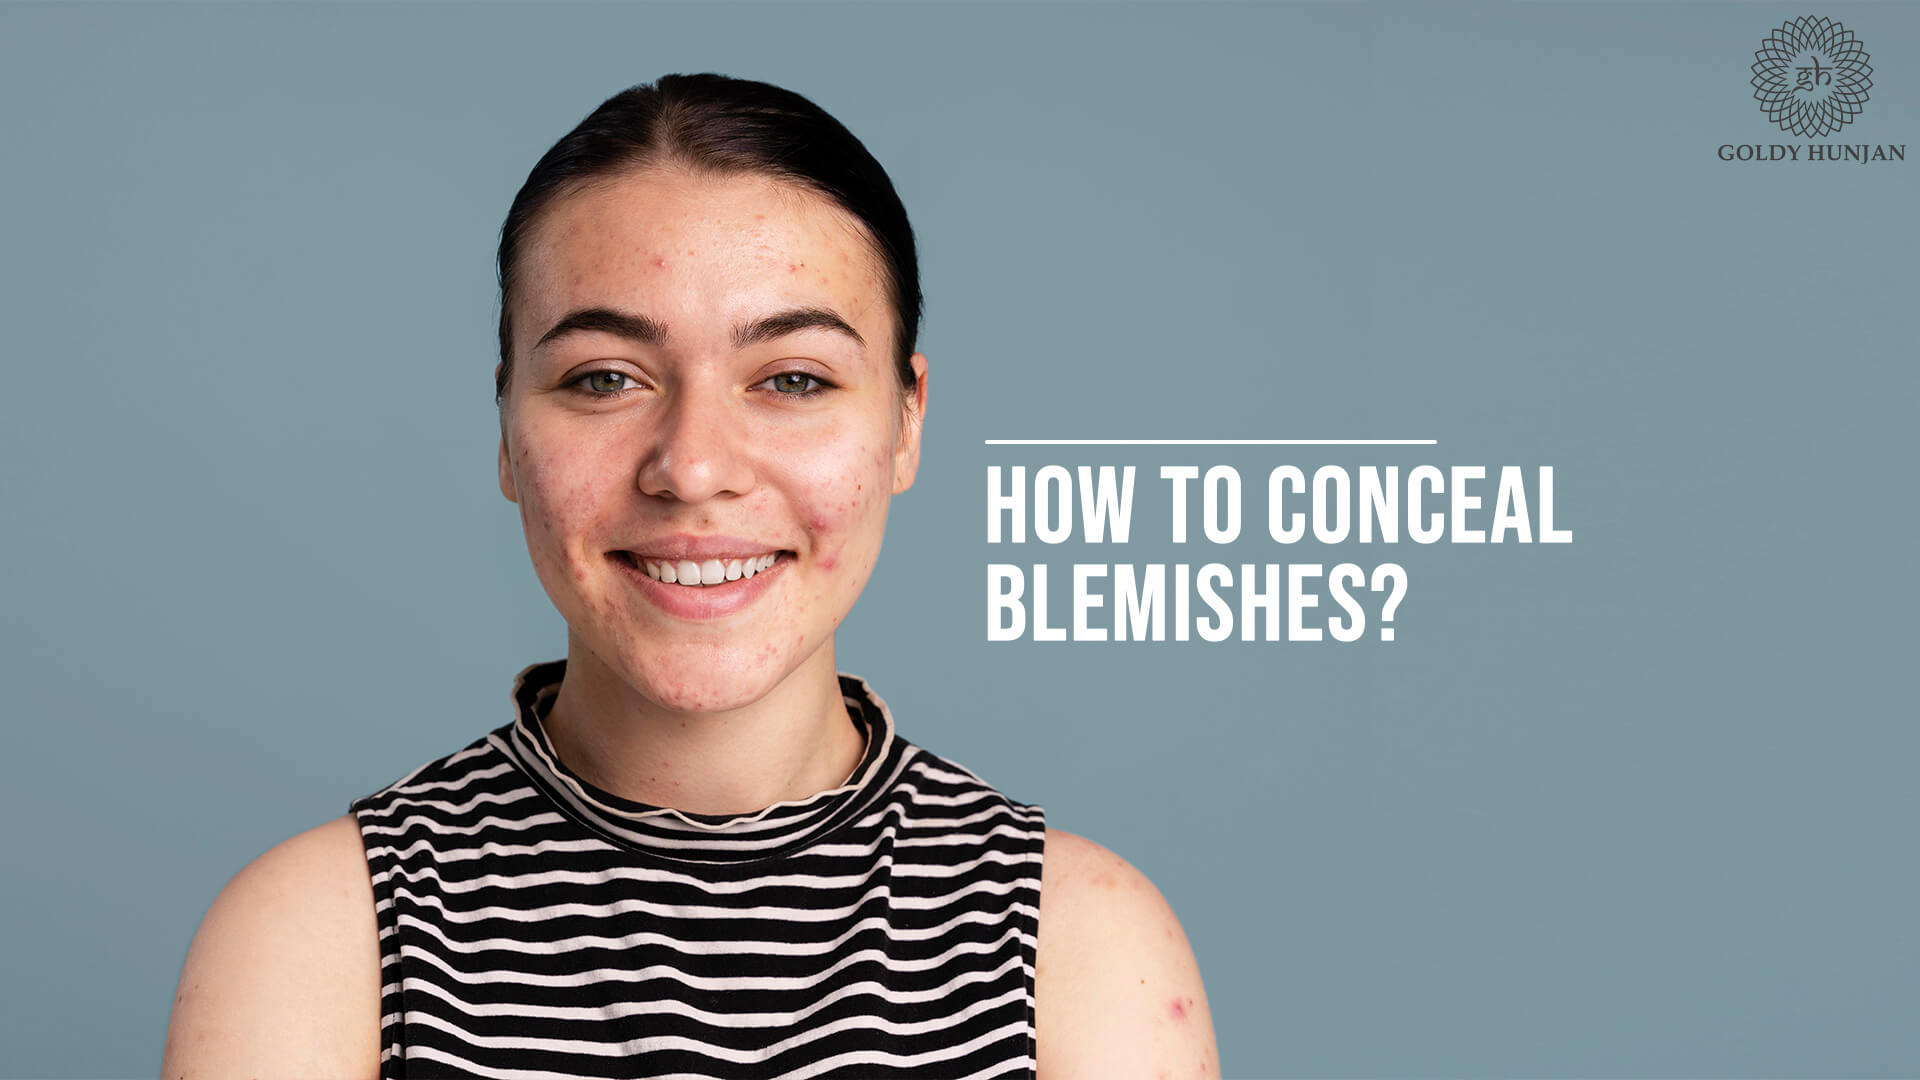 How to conceal blemishes